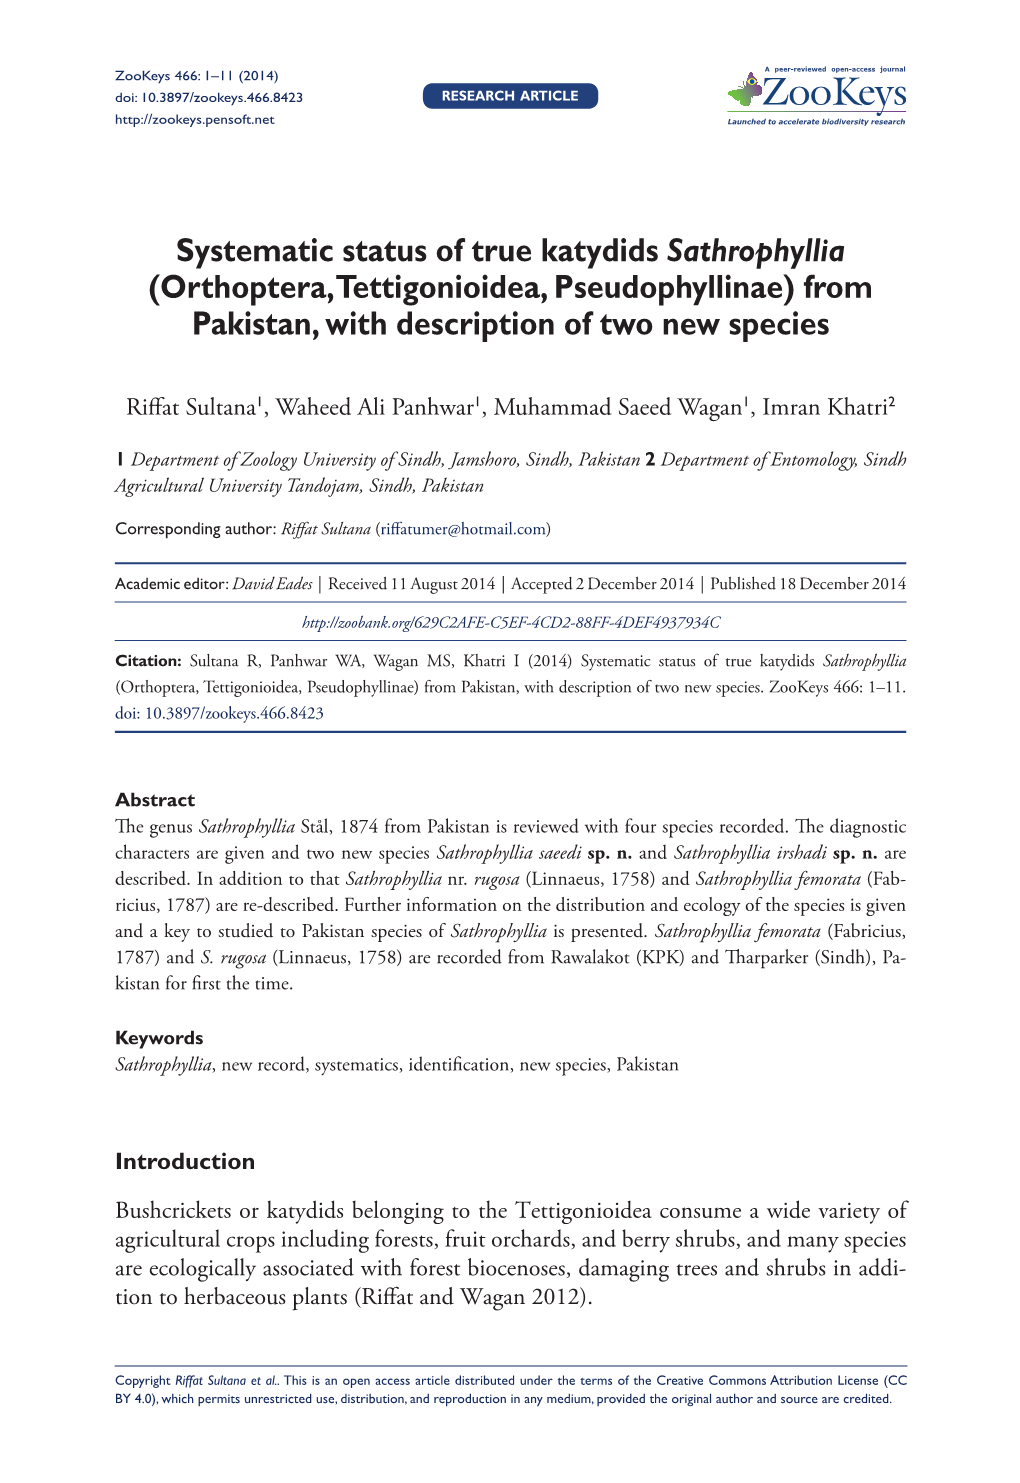 Systematic Status of True Katydids Sathrophyllia (Orthoptera, Tettigonioidea, Pseudophyllinae) from Pakistan, with Description of Two New Species